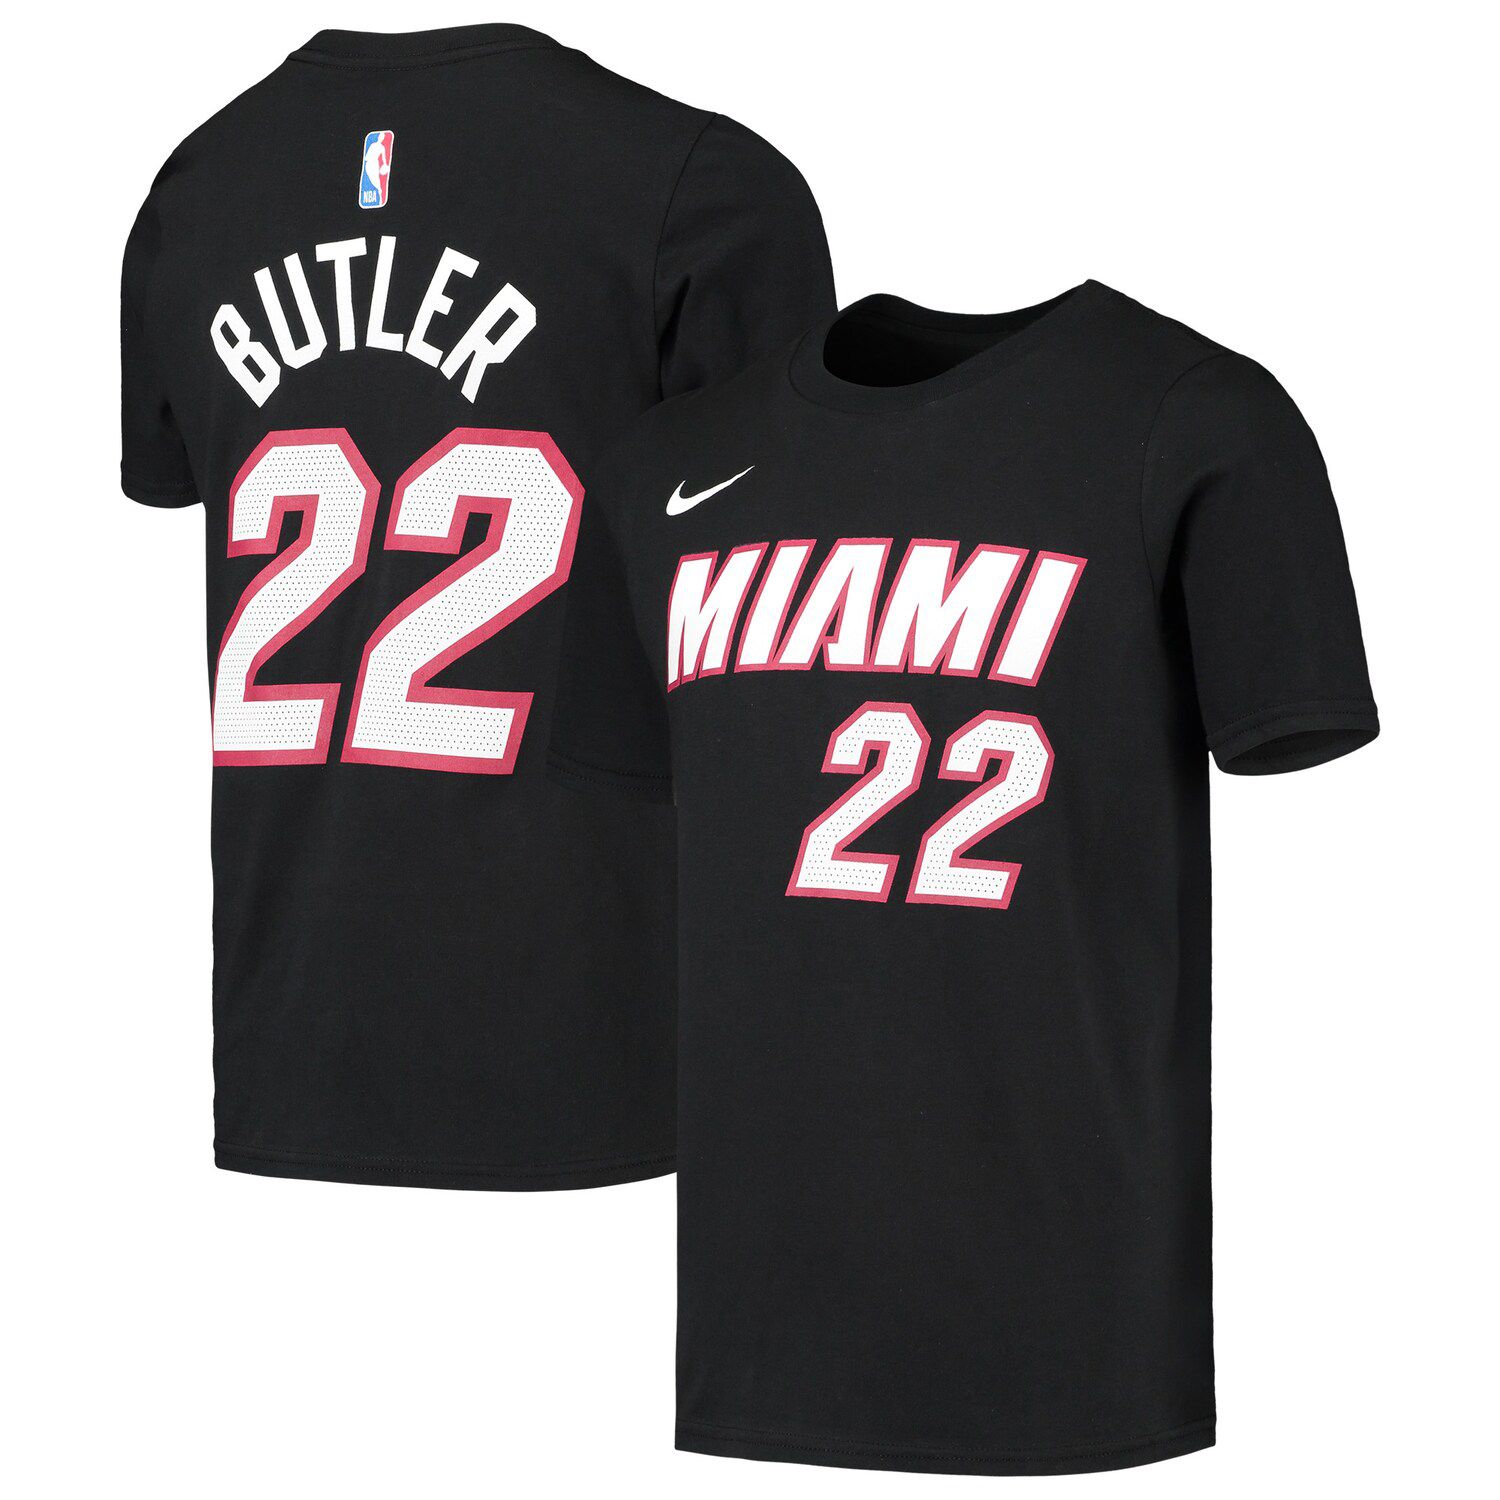 jimmy butler youth jersey